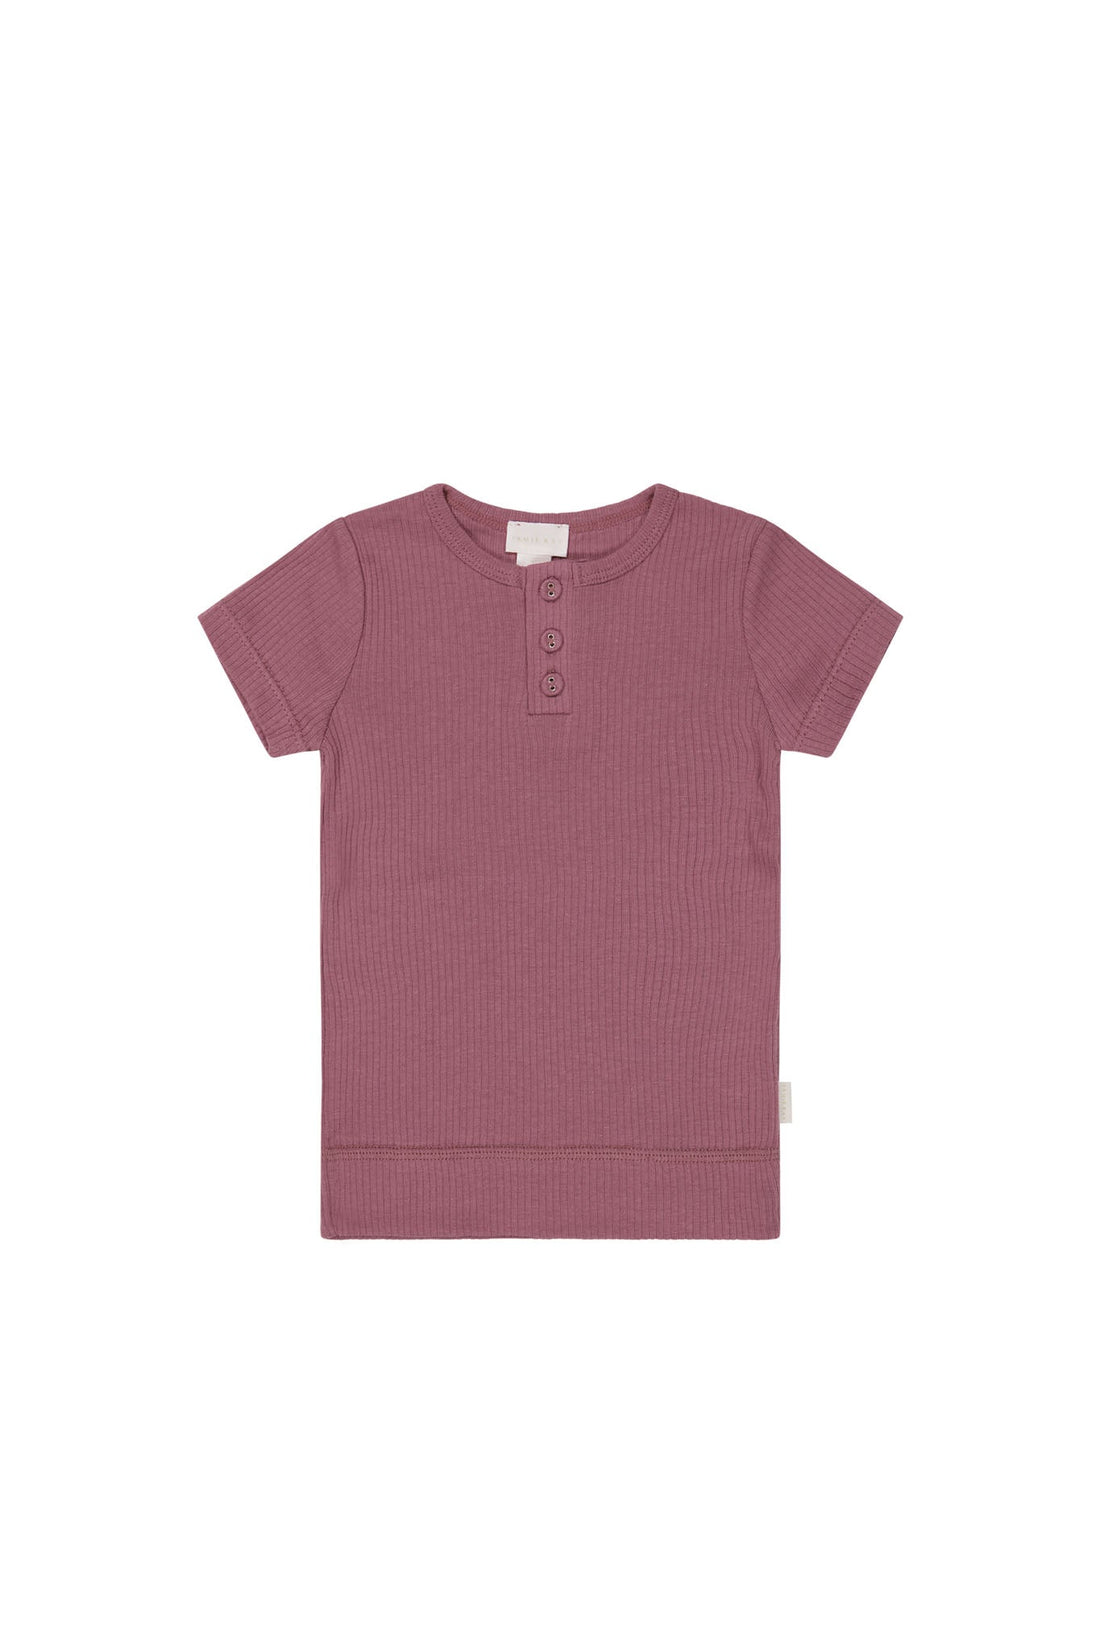 Organic Cotton Modal Henley Tee - Rosette Childrens Top from Jamie Kay USA